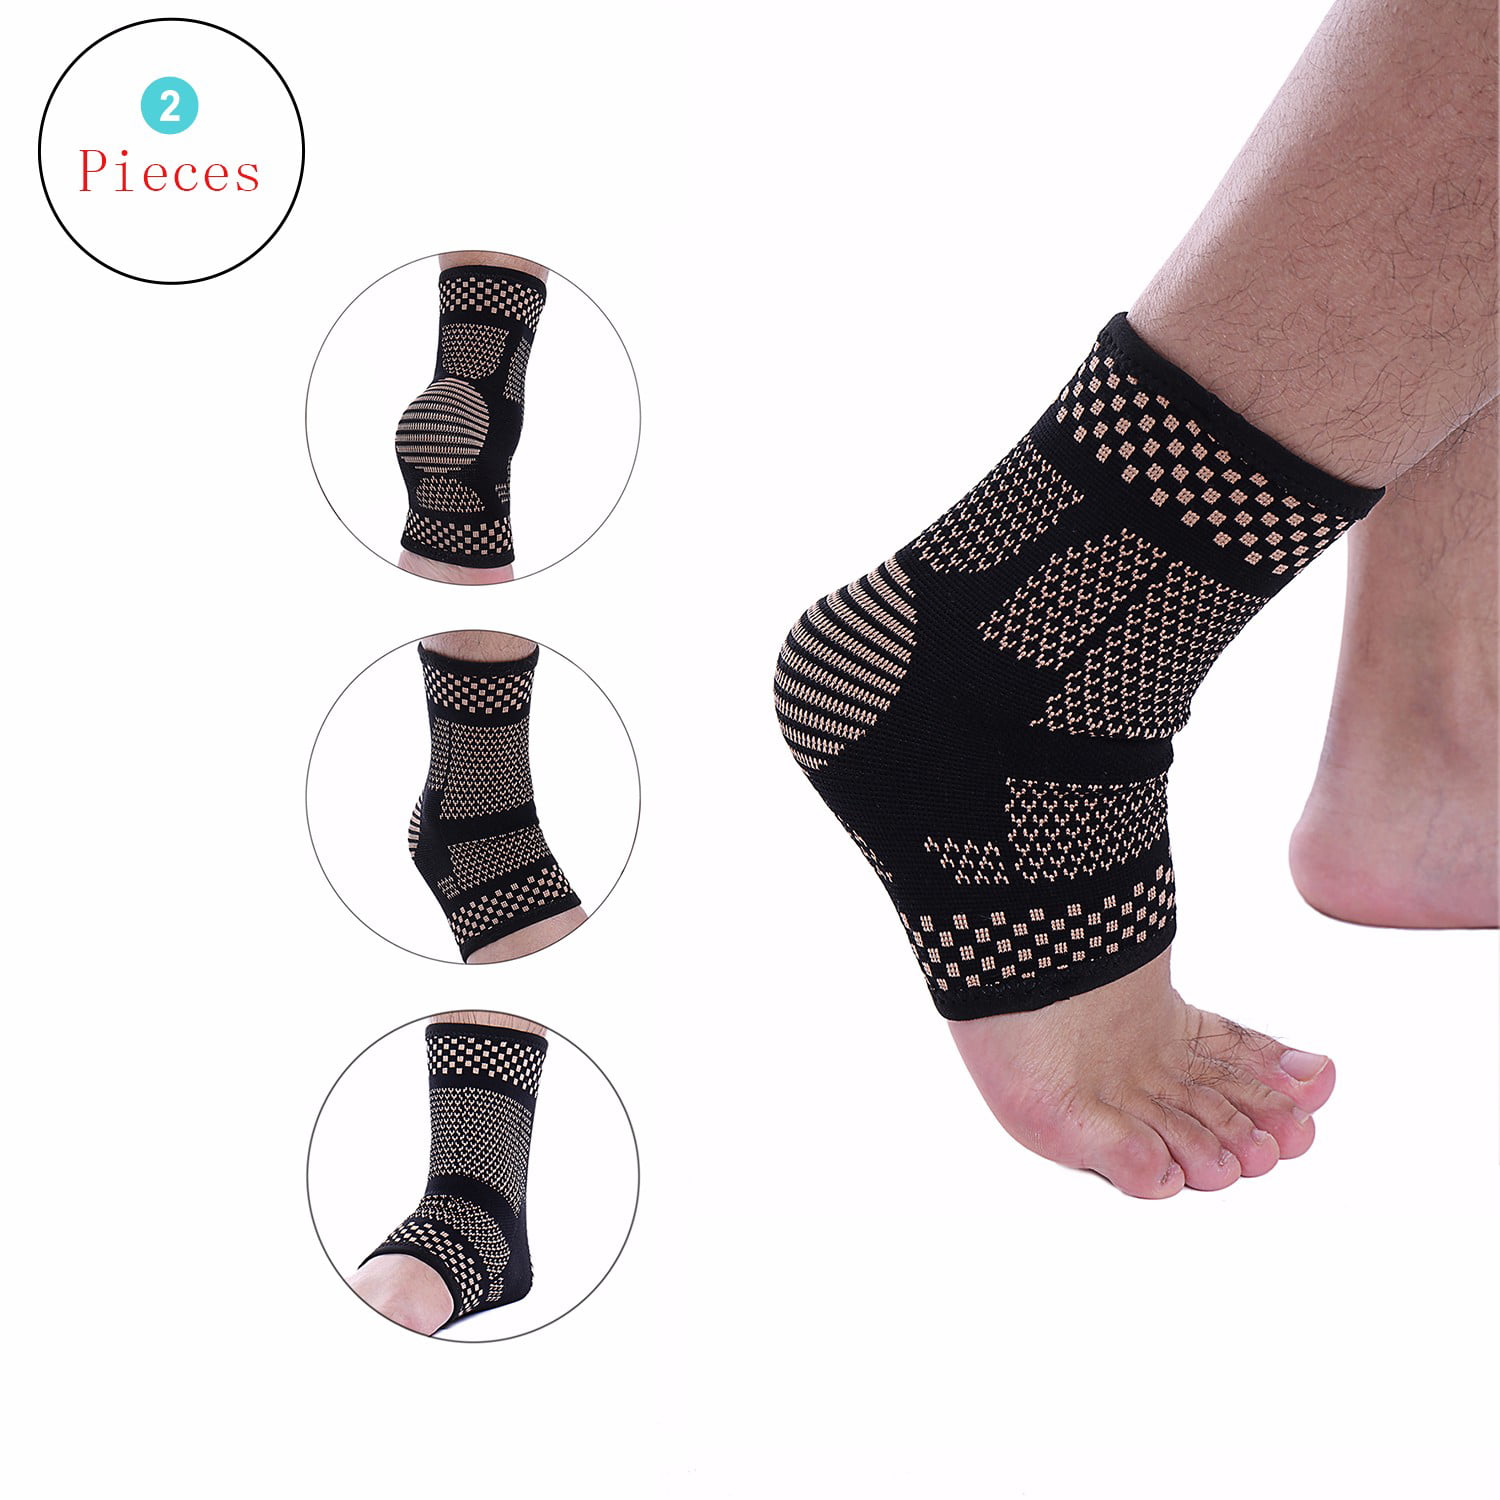 CFR Ankle Brace Breathable Compression Support Sleeve Plantar Fasciitis,Ankle Stabilizer Foot Socks withAdjustable Strap for Swelling & Heel Spur Pain,Soothe Achy Feet,Running,Basketball 